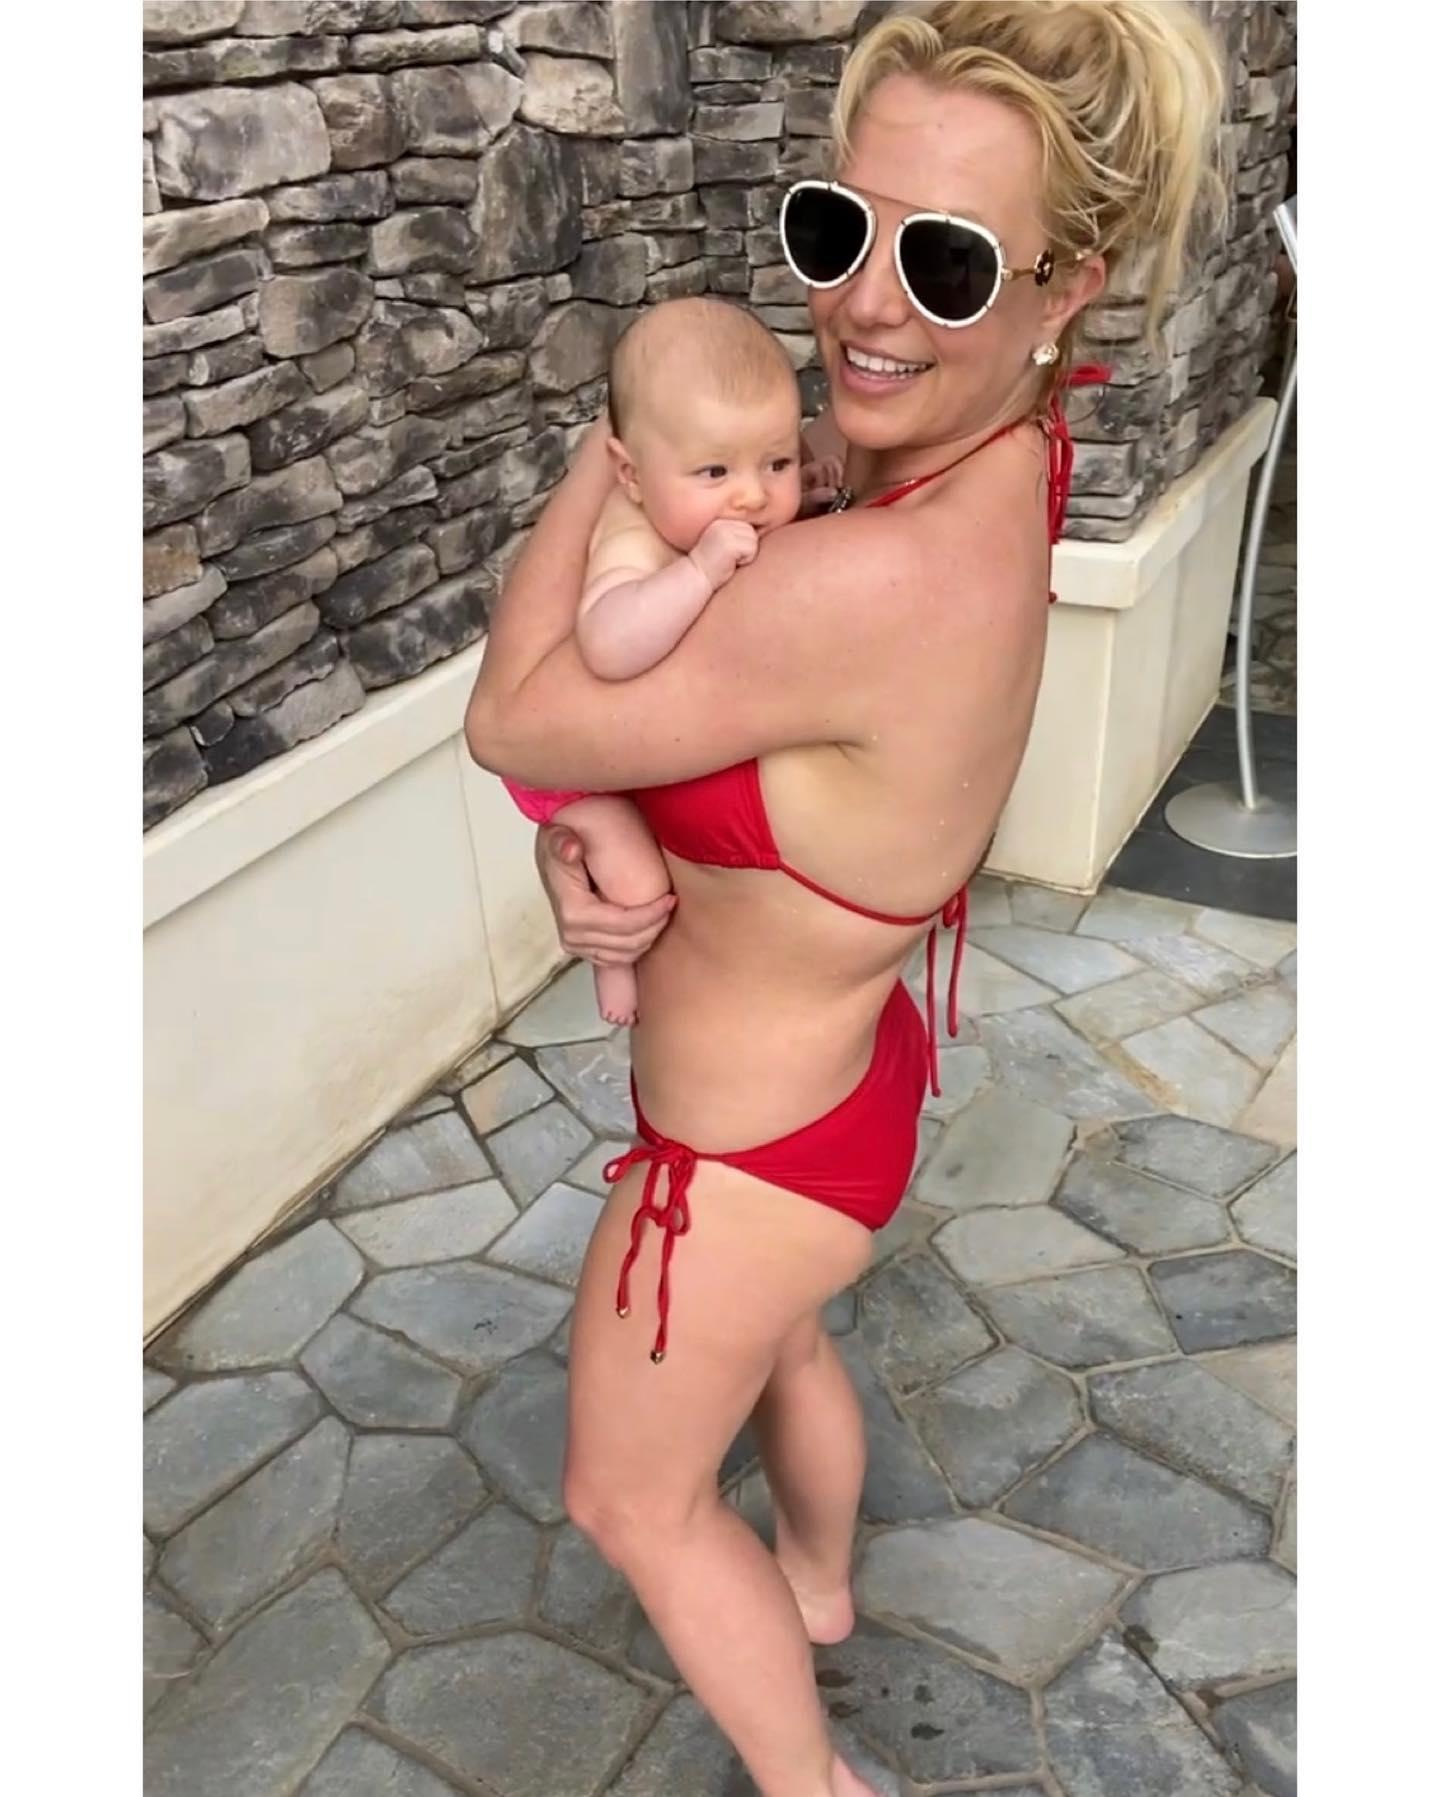 Britney Spears said she ate play-dog with a baby she found on vacation